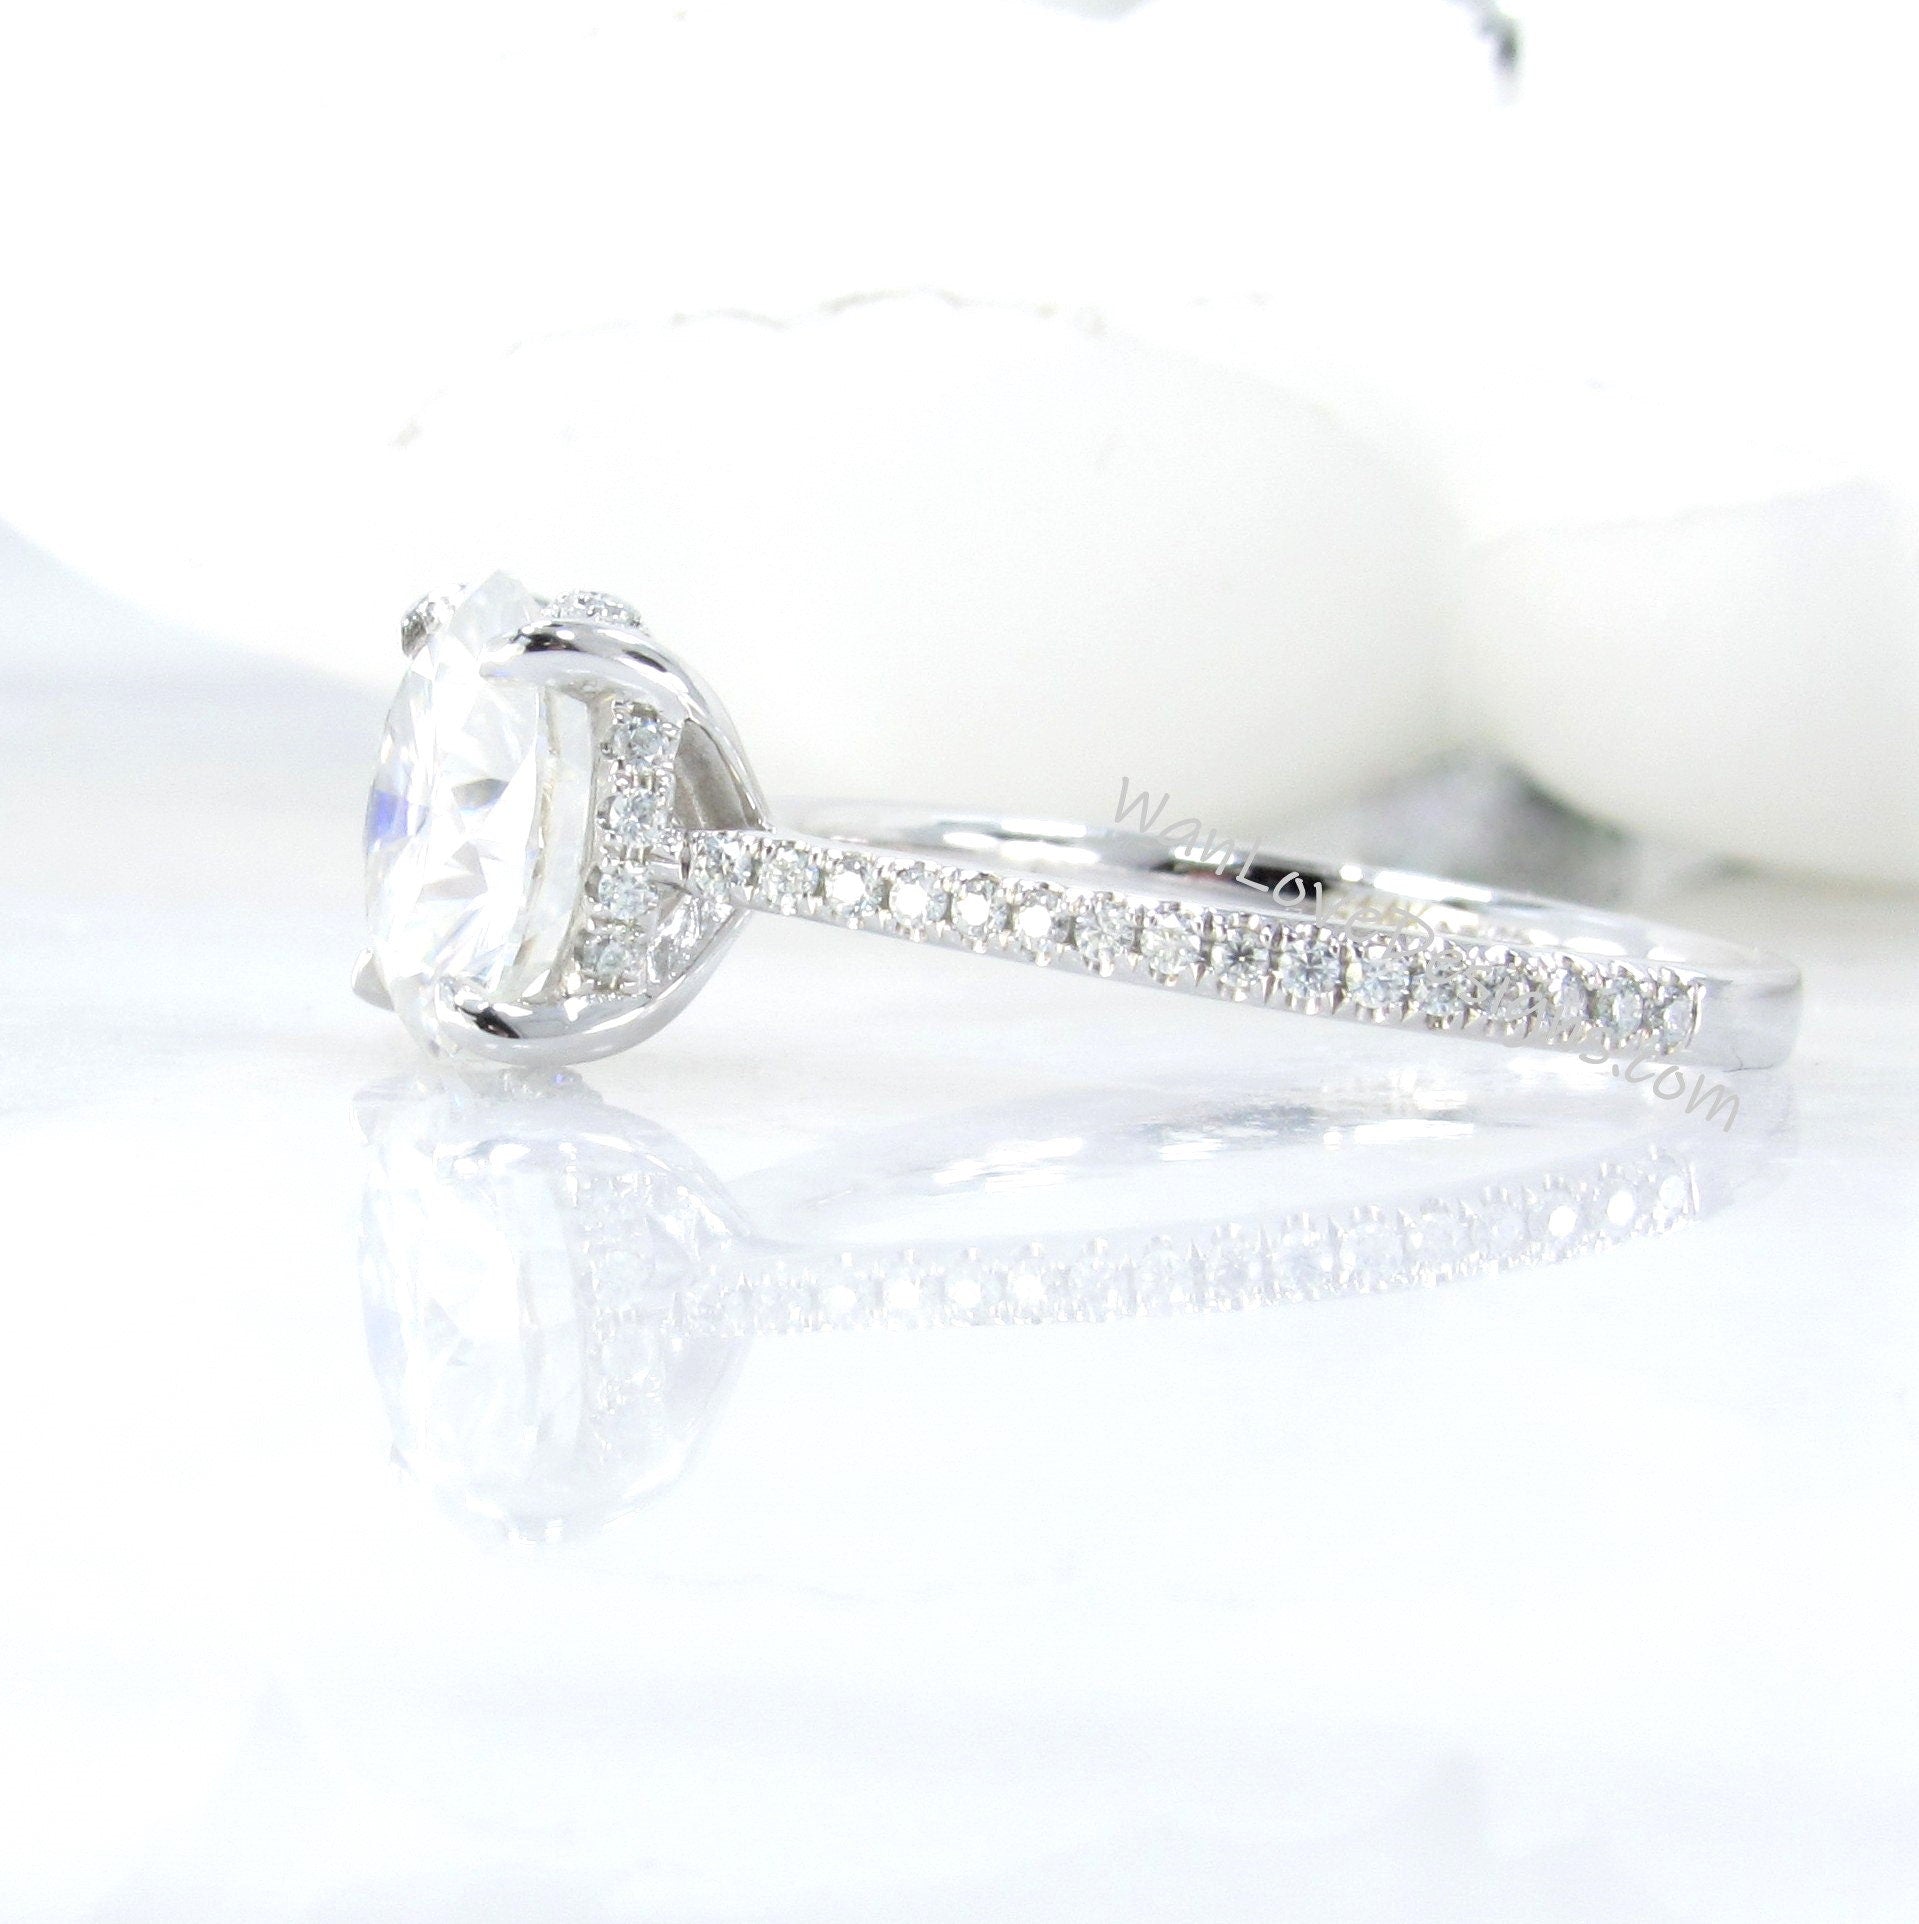 Moissanite engagement ring round cut vintage engagement ring prong set ring moissanite ring white gold anniversary ring Ready to Ship Wan Love Designs